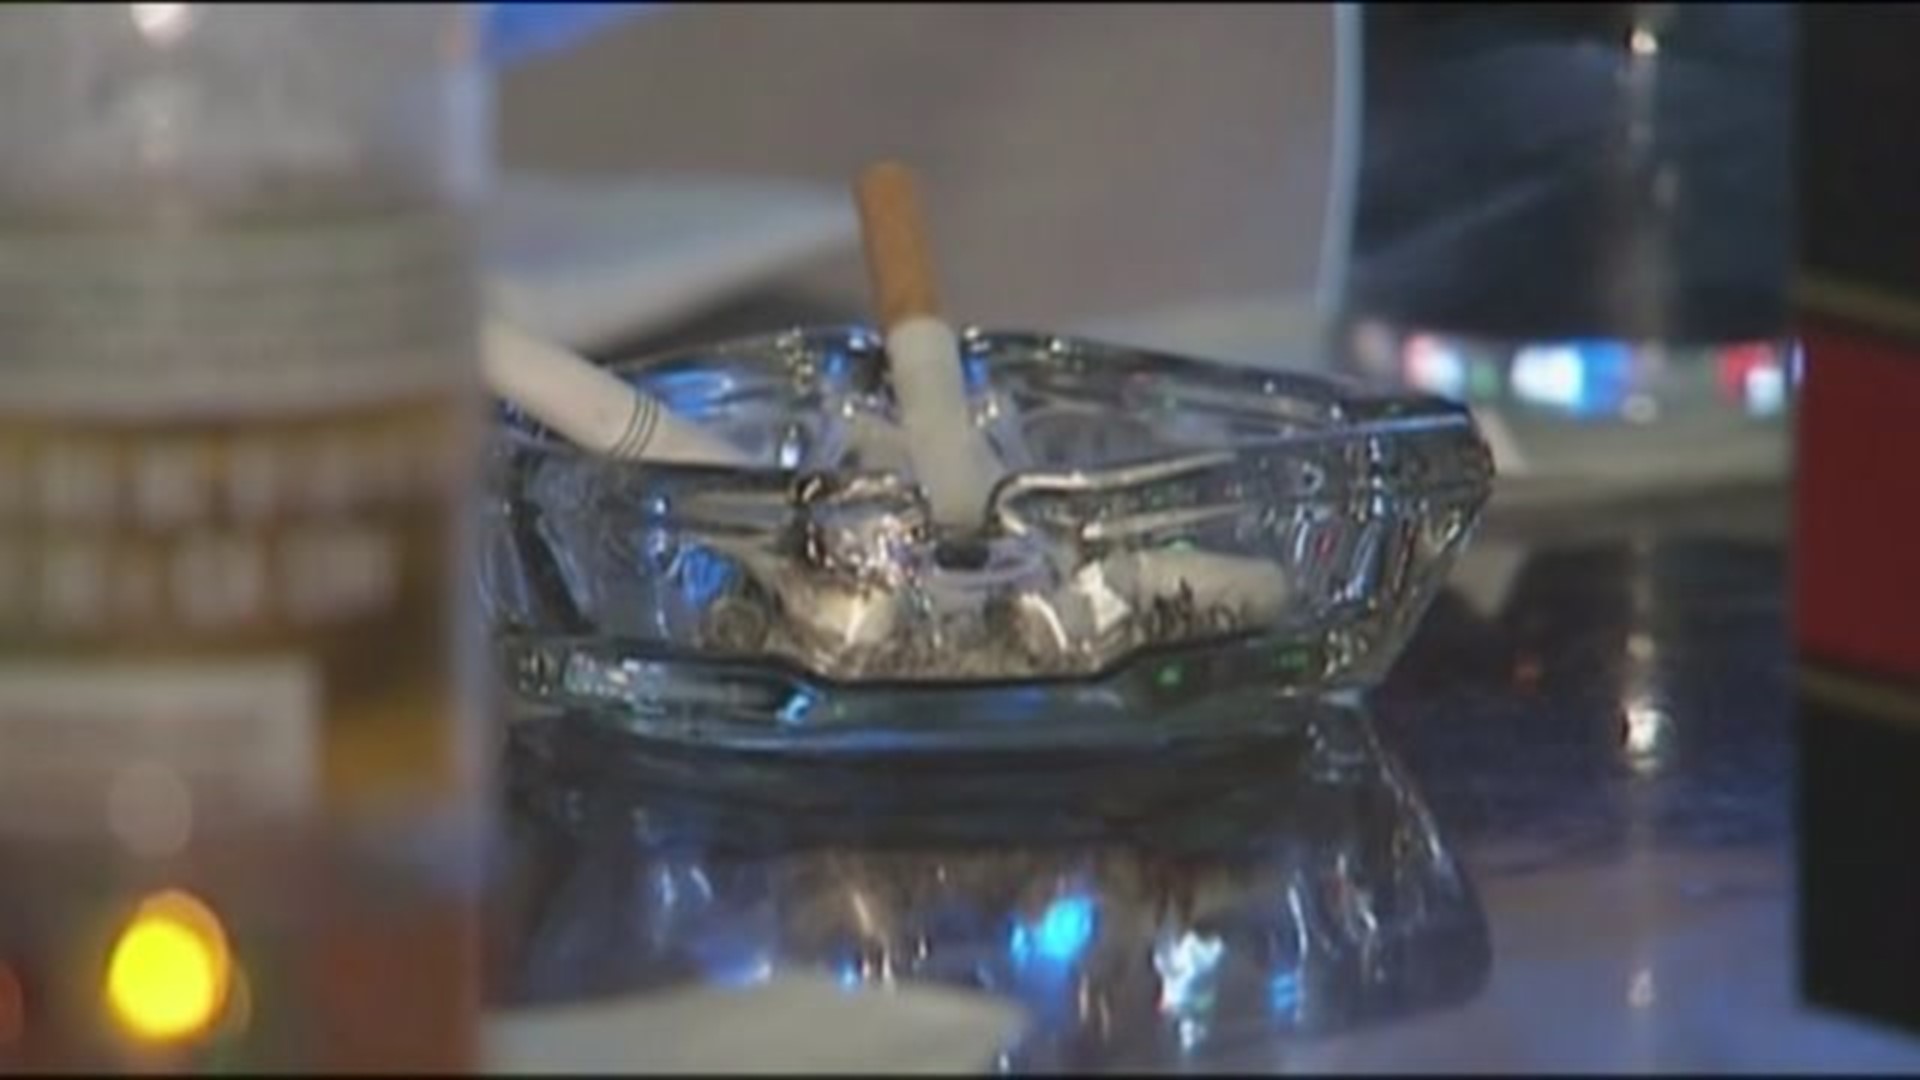 How will a tax on cigarettes impact Connecticut?